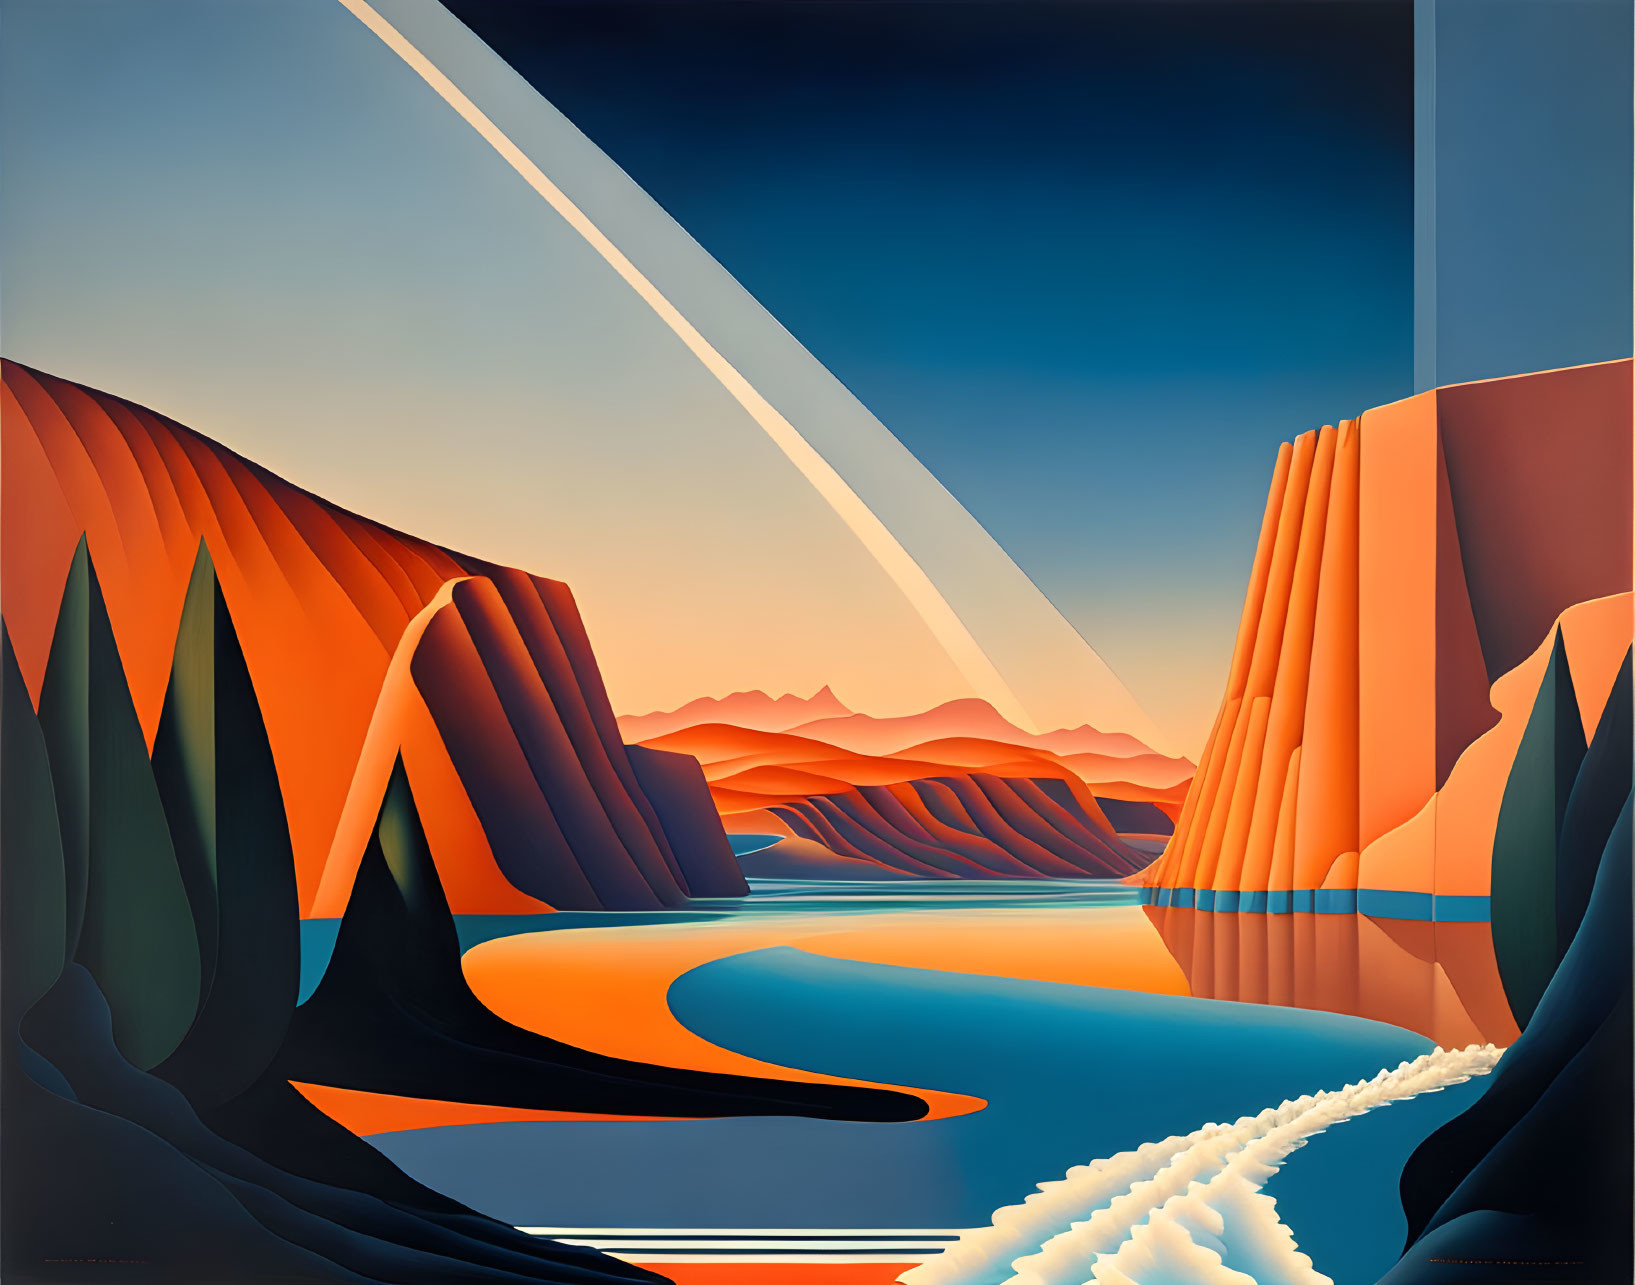 Geometric Landscape in Orange and Blue with Mountains and River